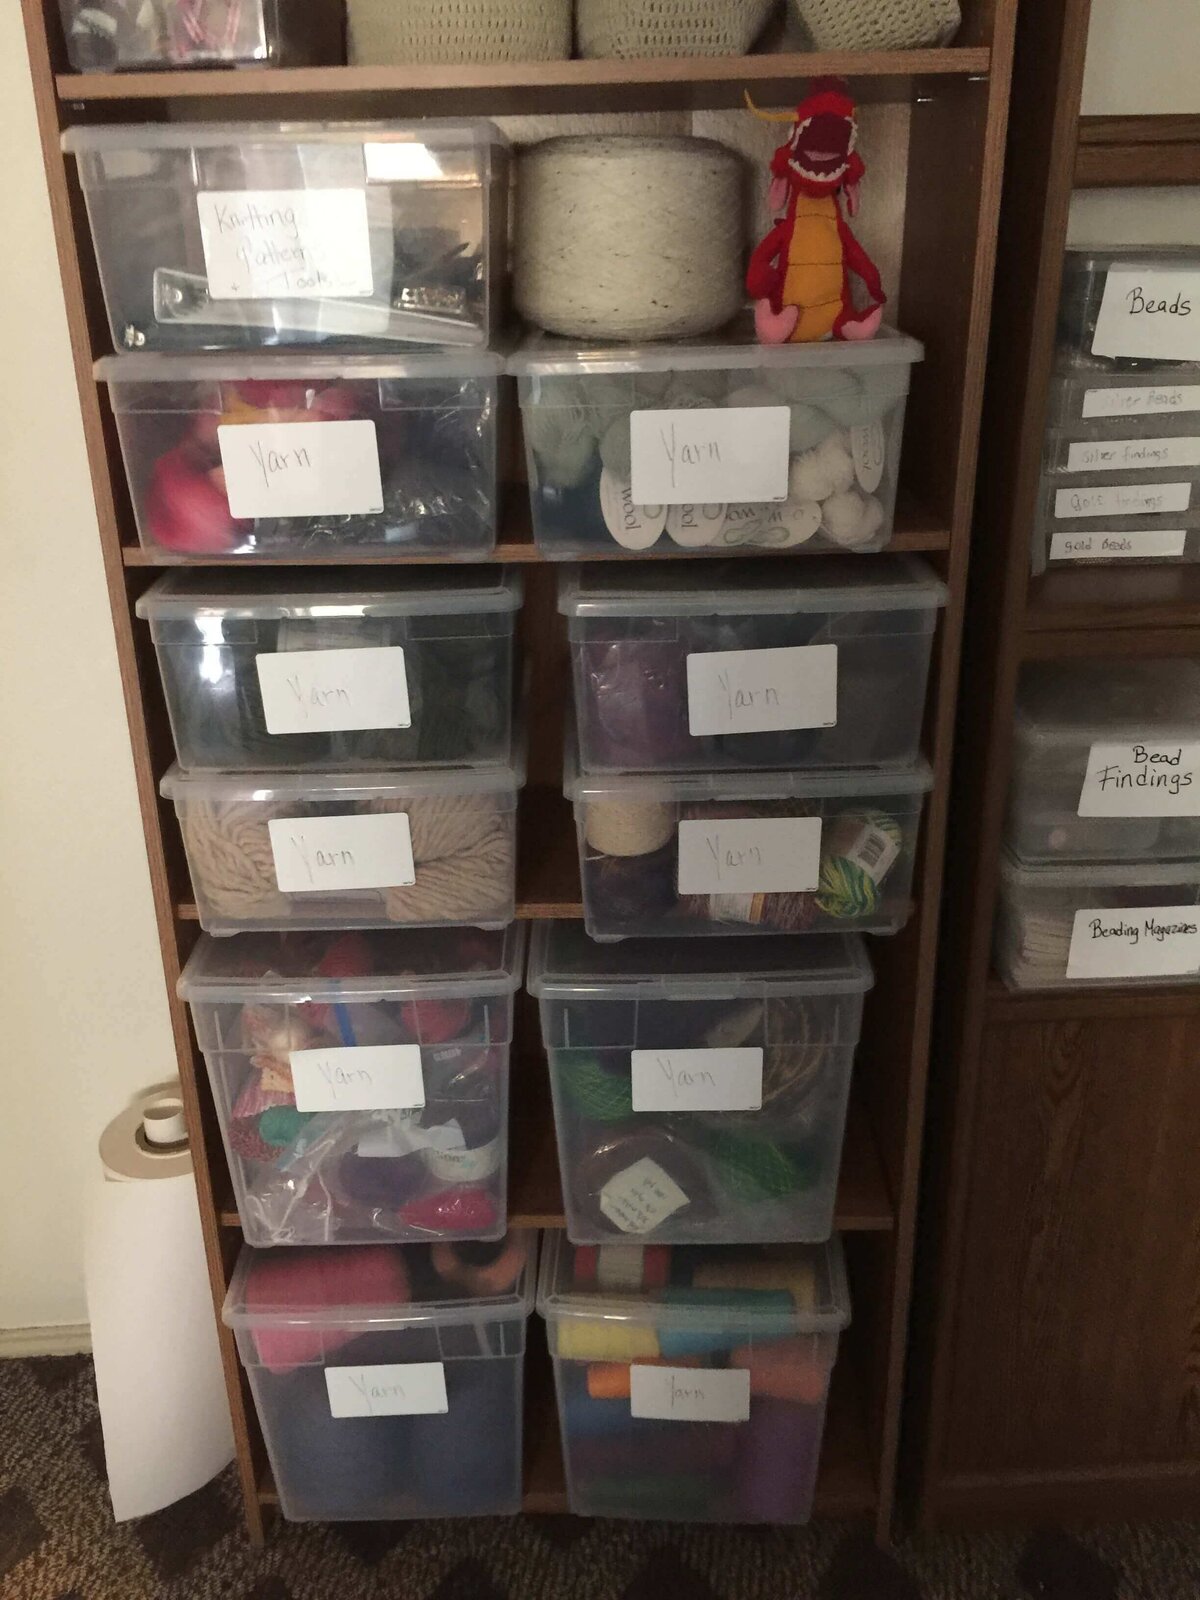 Organized storage space with labeled bins